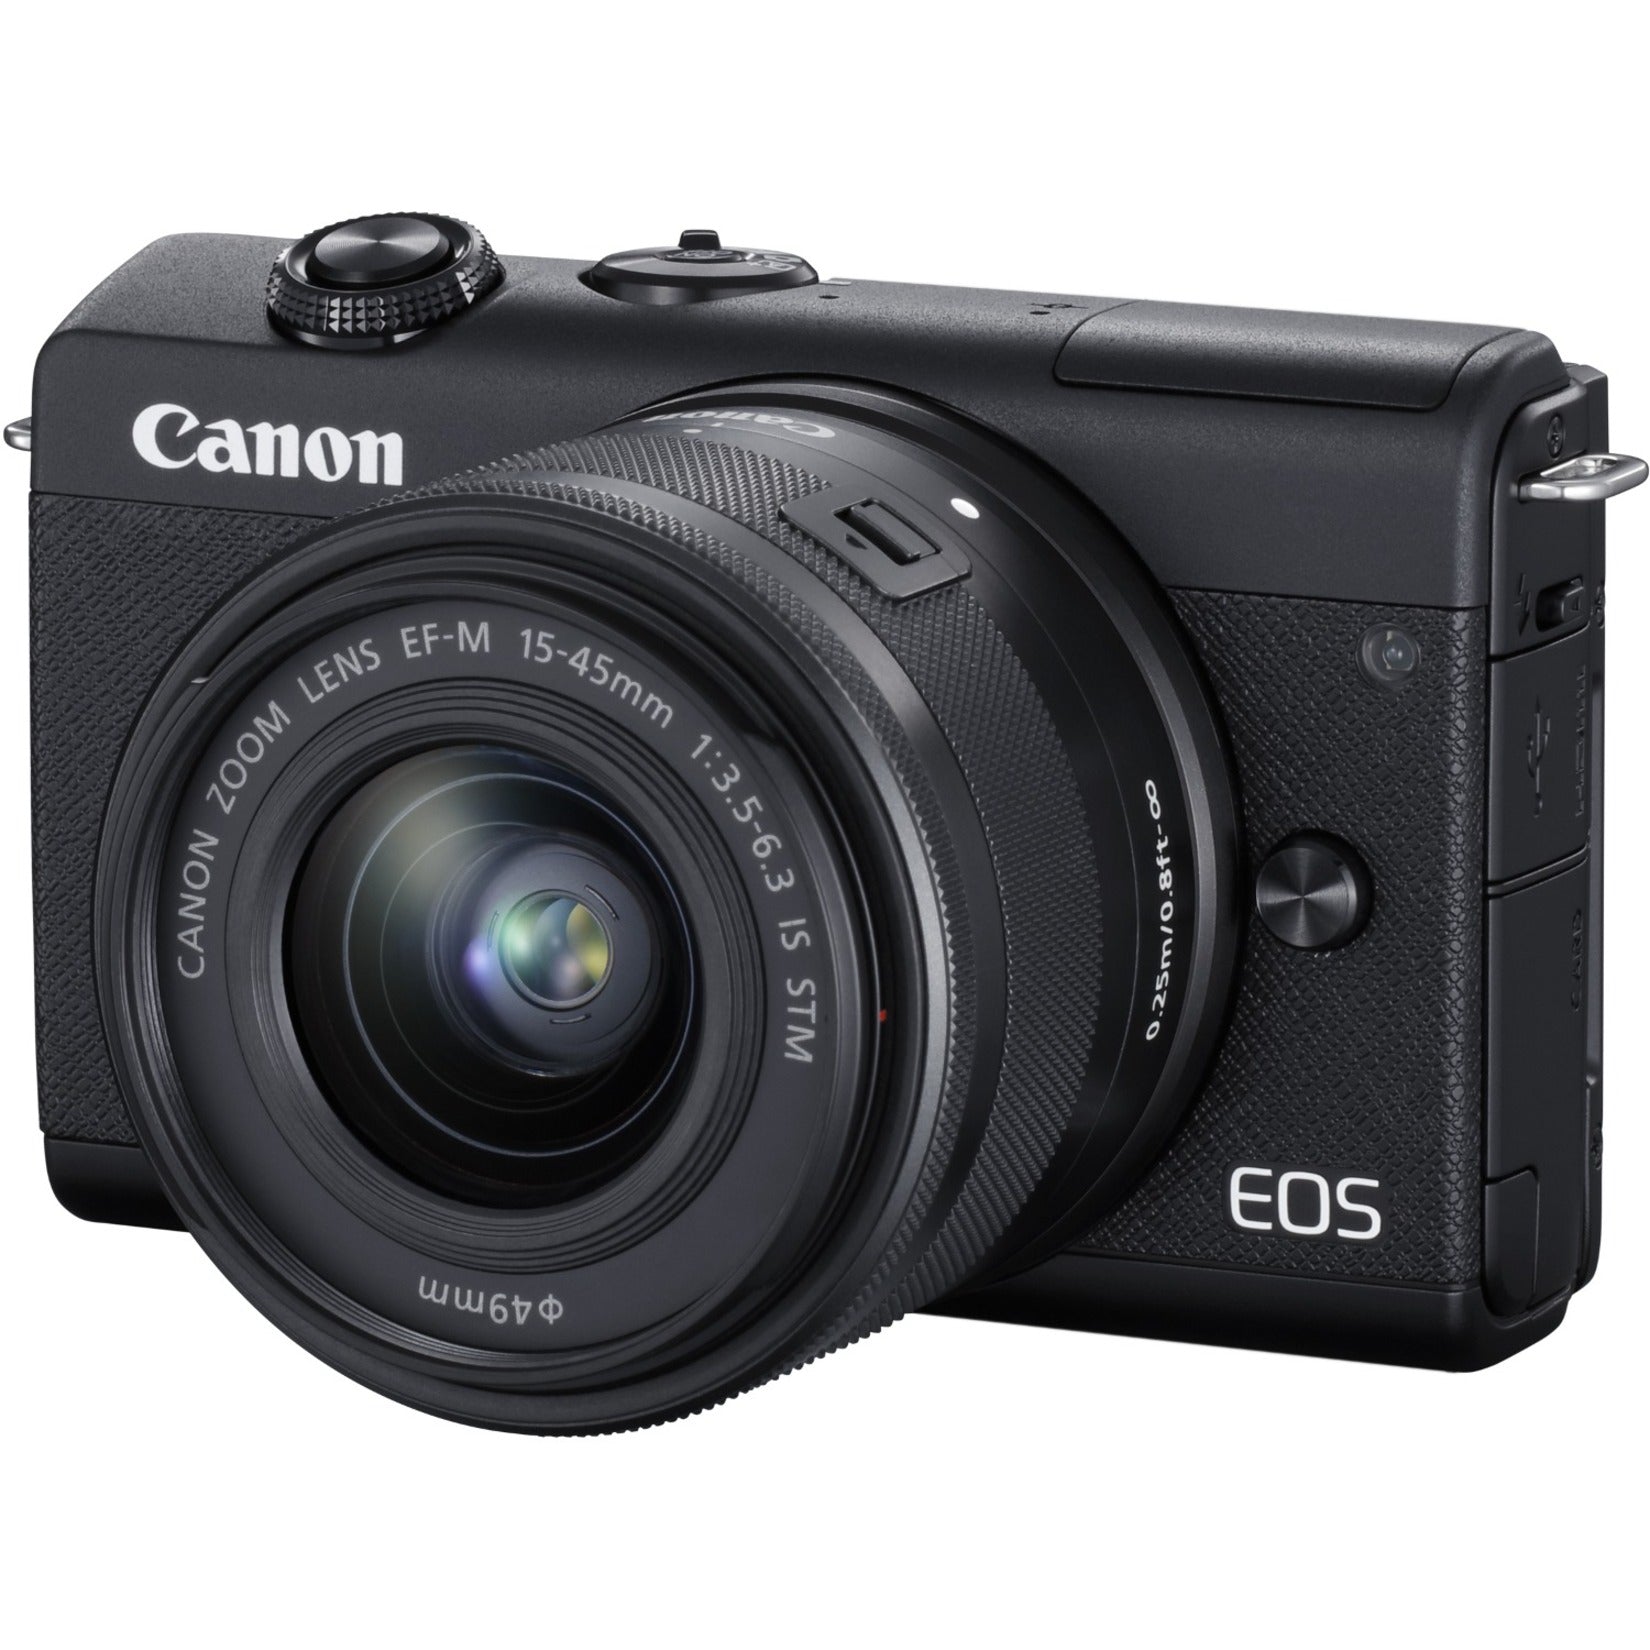 Canon 3699C009 EOS M200 Mirrorless Camera with Lens, 24.1 Megapixel, 3 Touchscreen, 4K Video